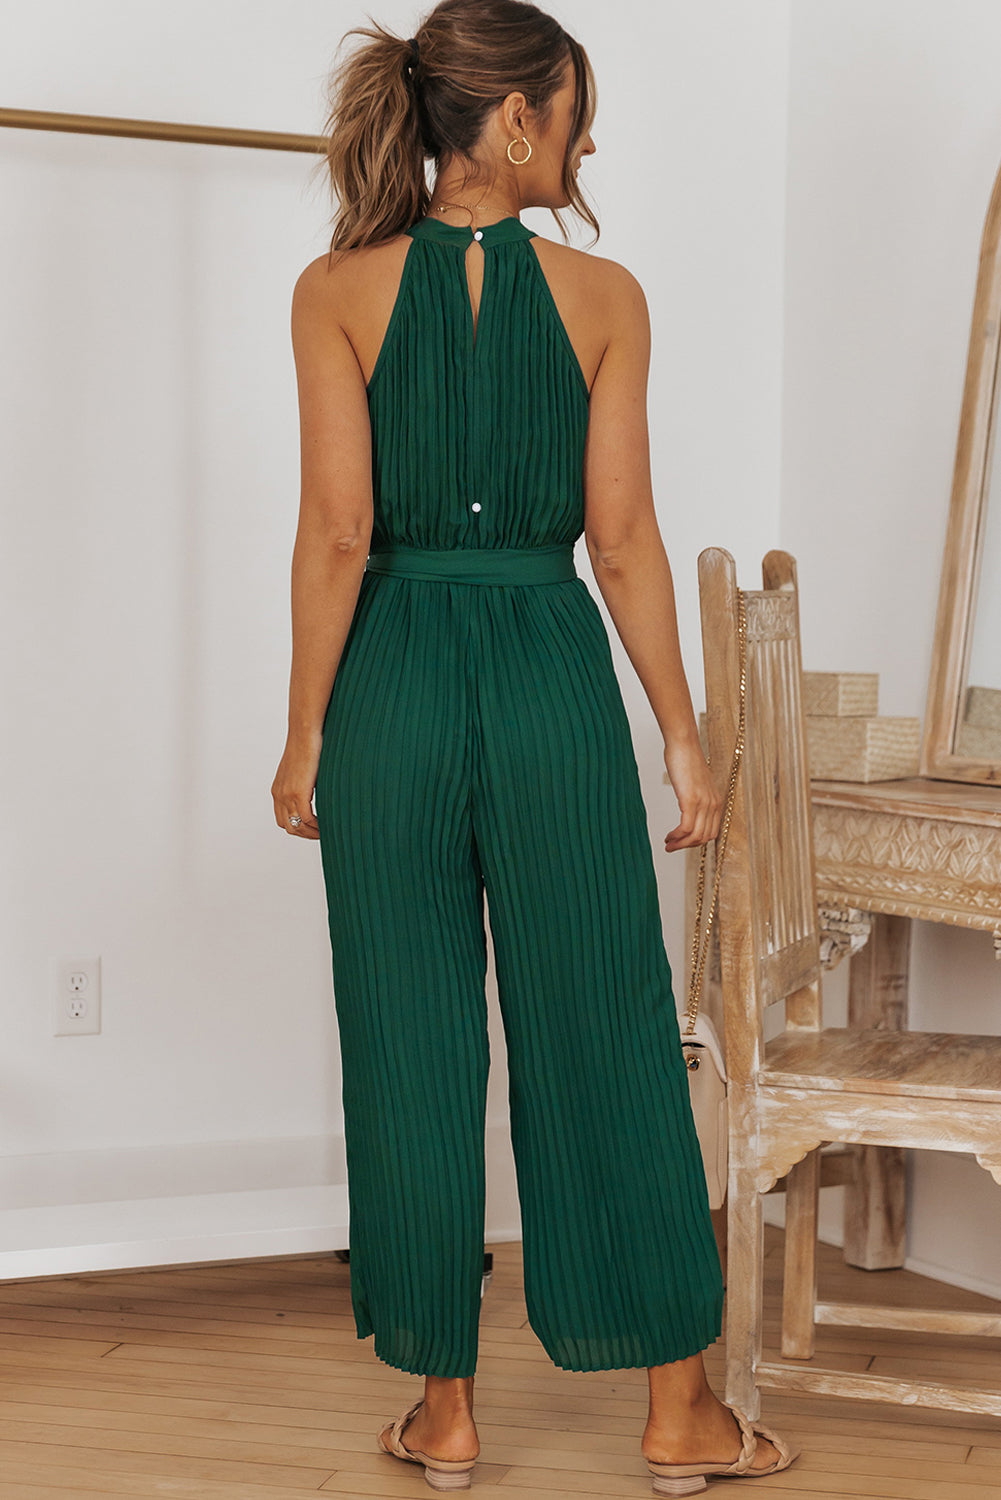 Accordion Pleated Belted Grecian Neck Sleeveless Jumpsuit - Runway Frenzy